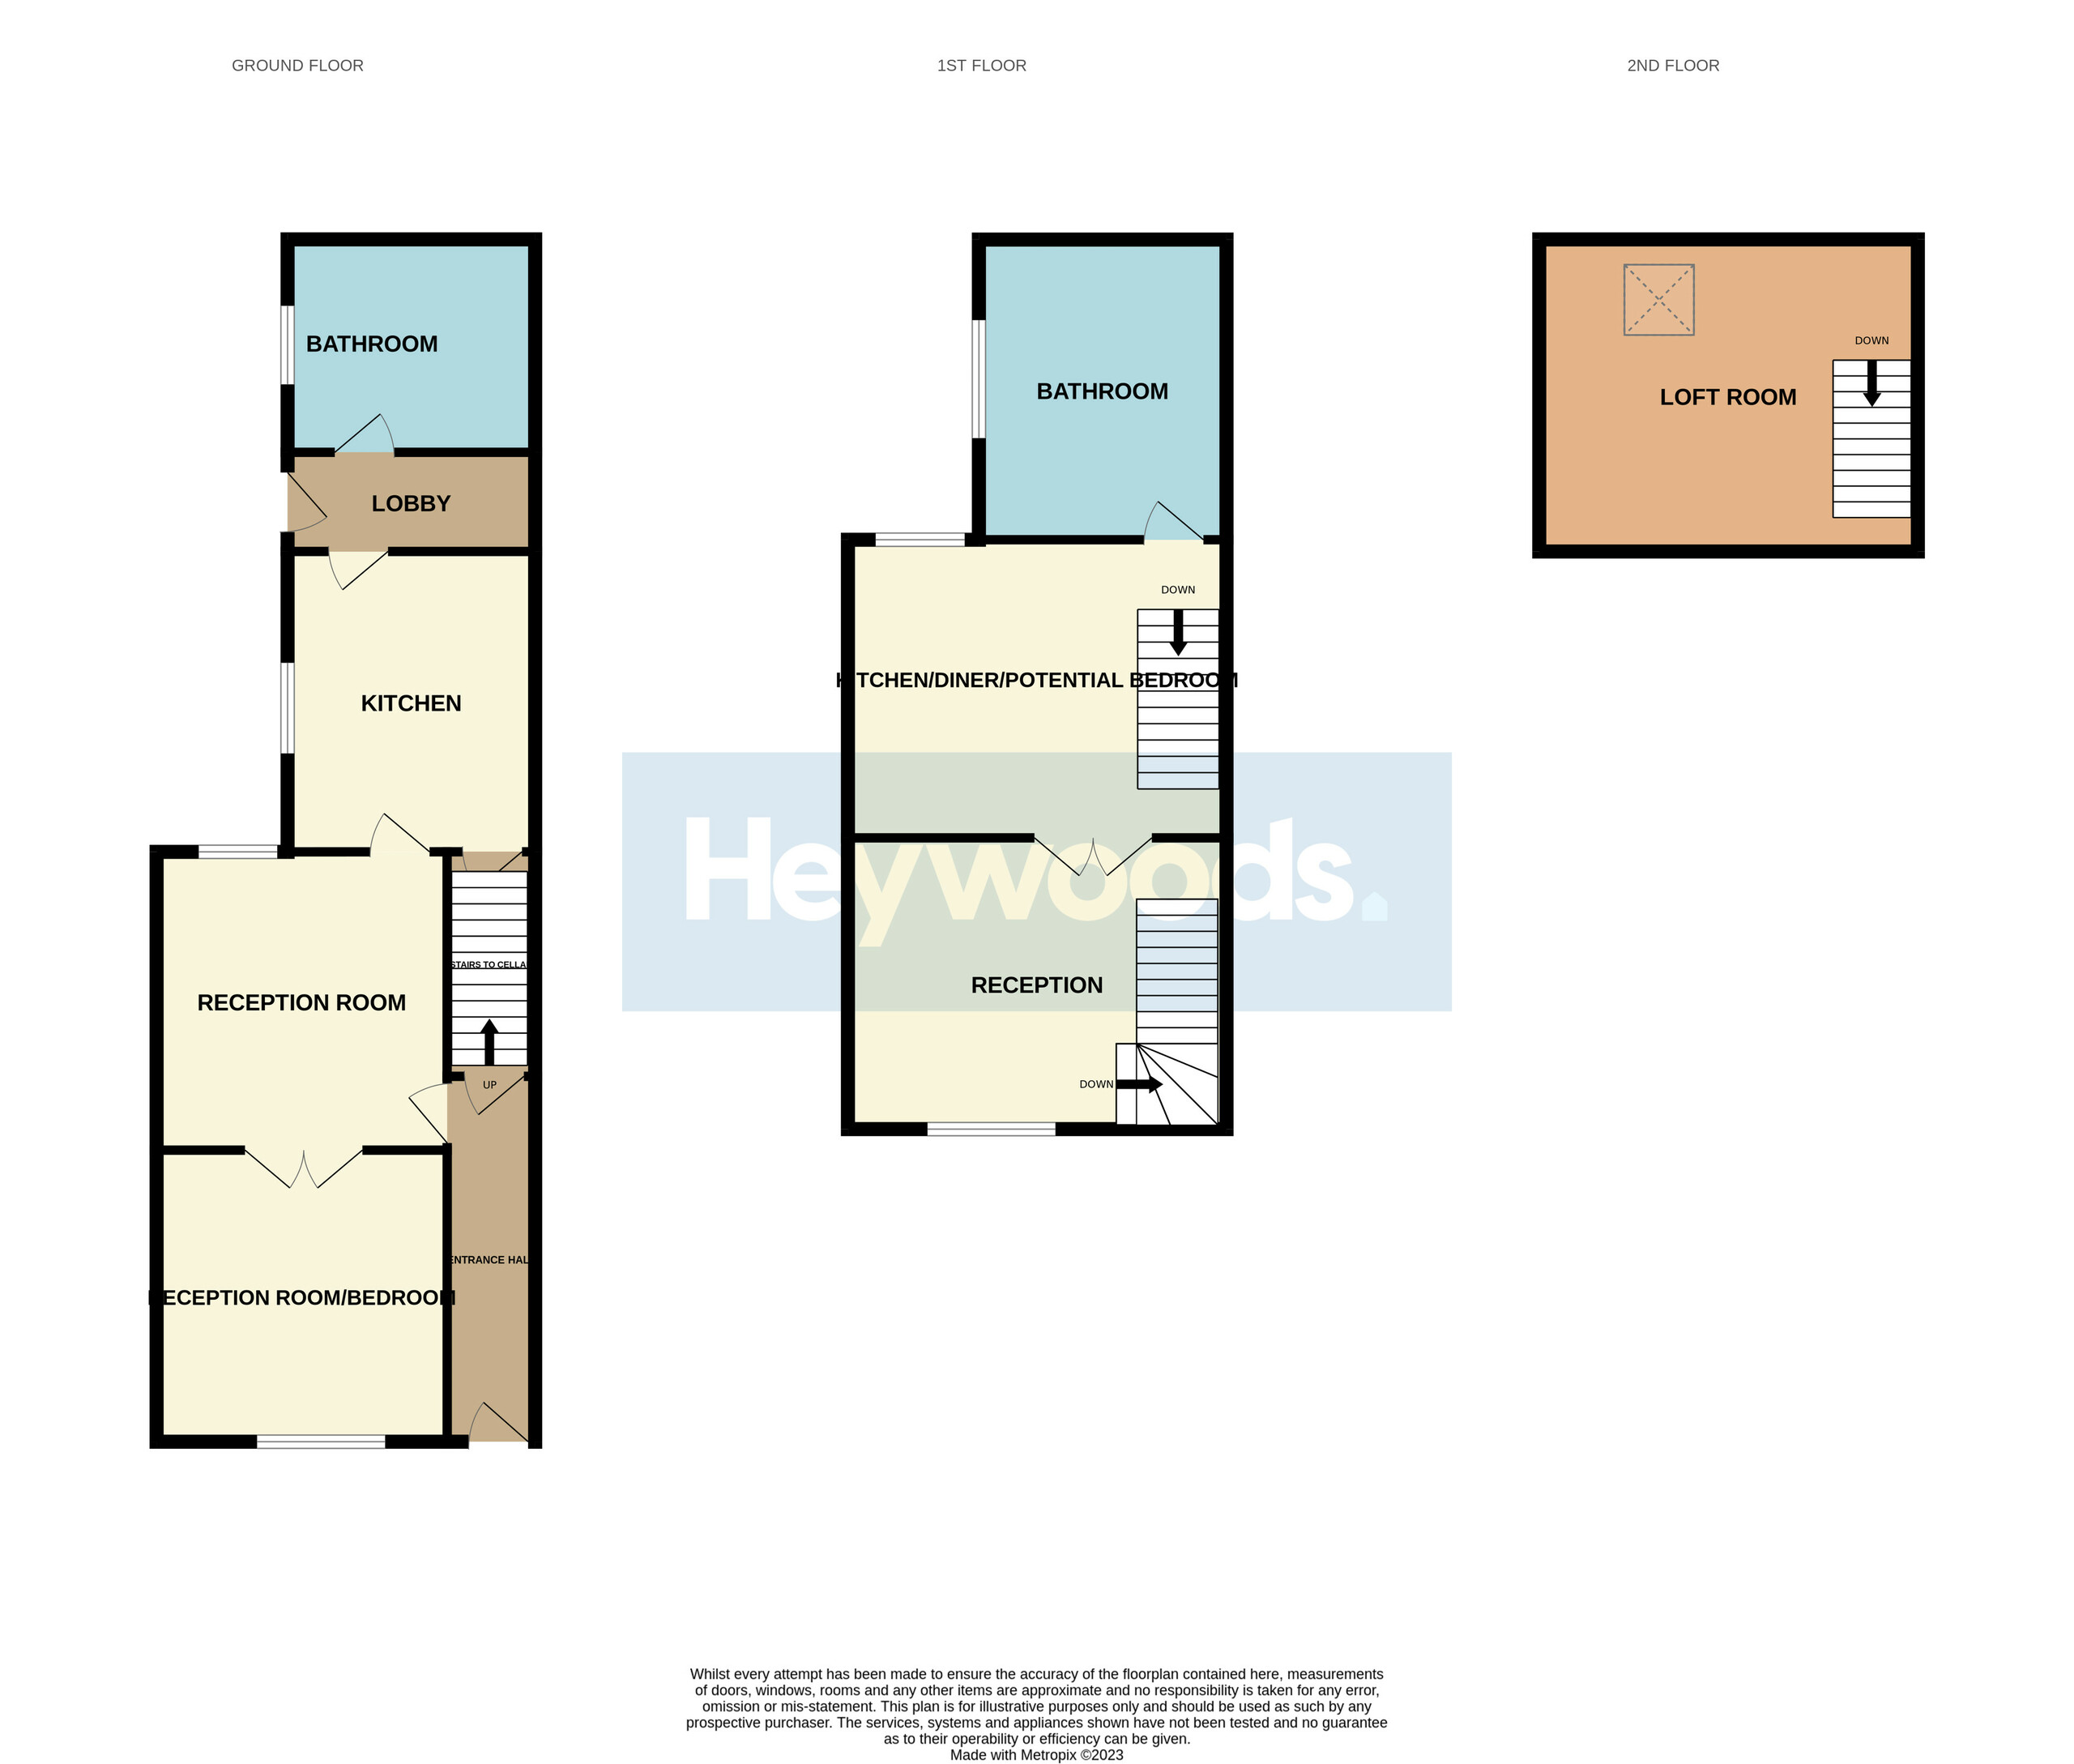 2 bed end of terrace house for sale in Penkhull, Stoke-on-Trent - Property floorplan